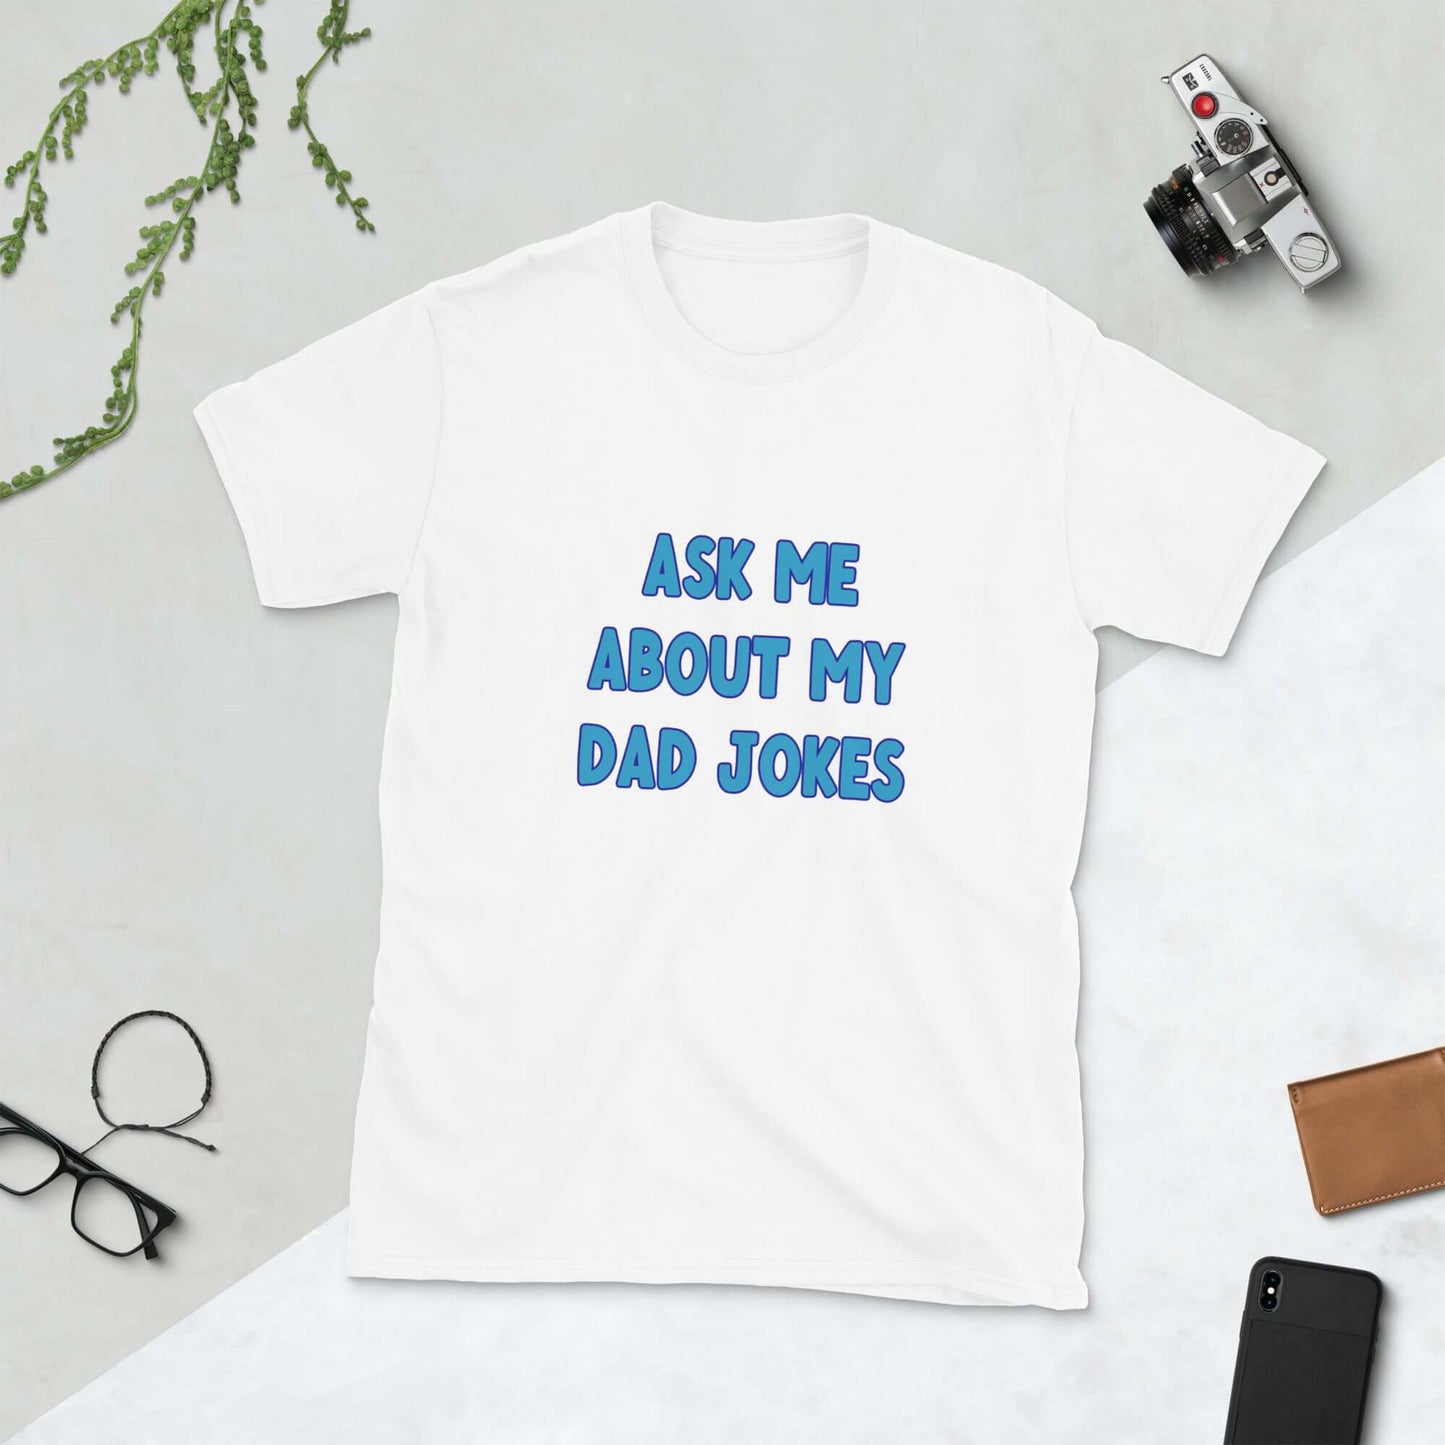 Ask me about my Dad jokes t-shirt